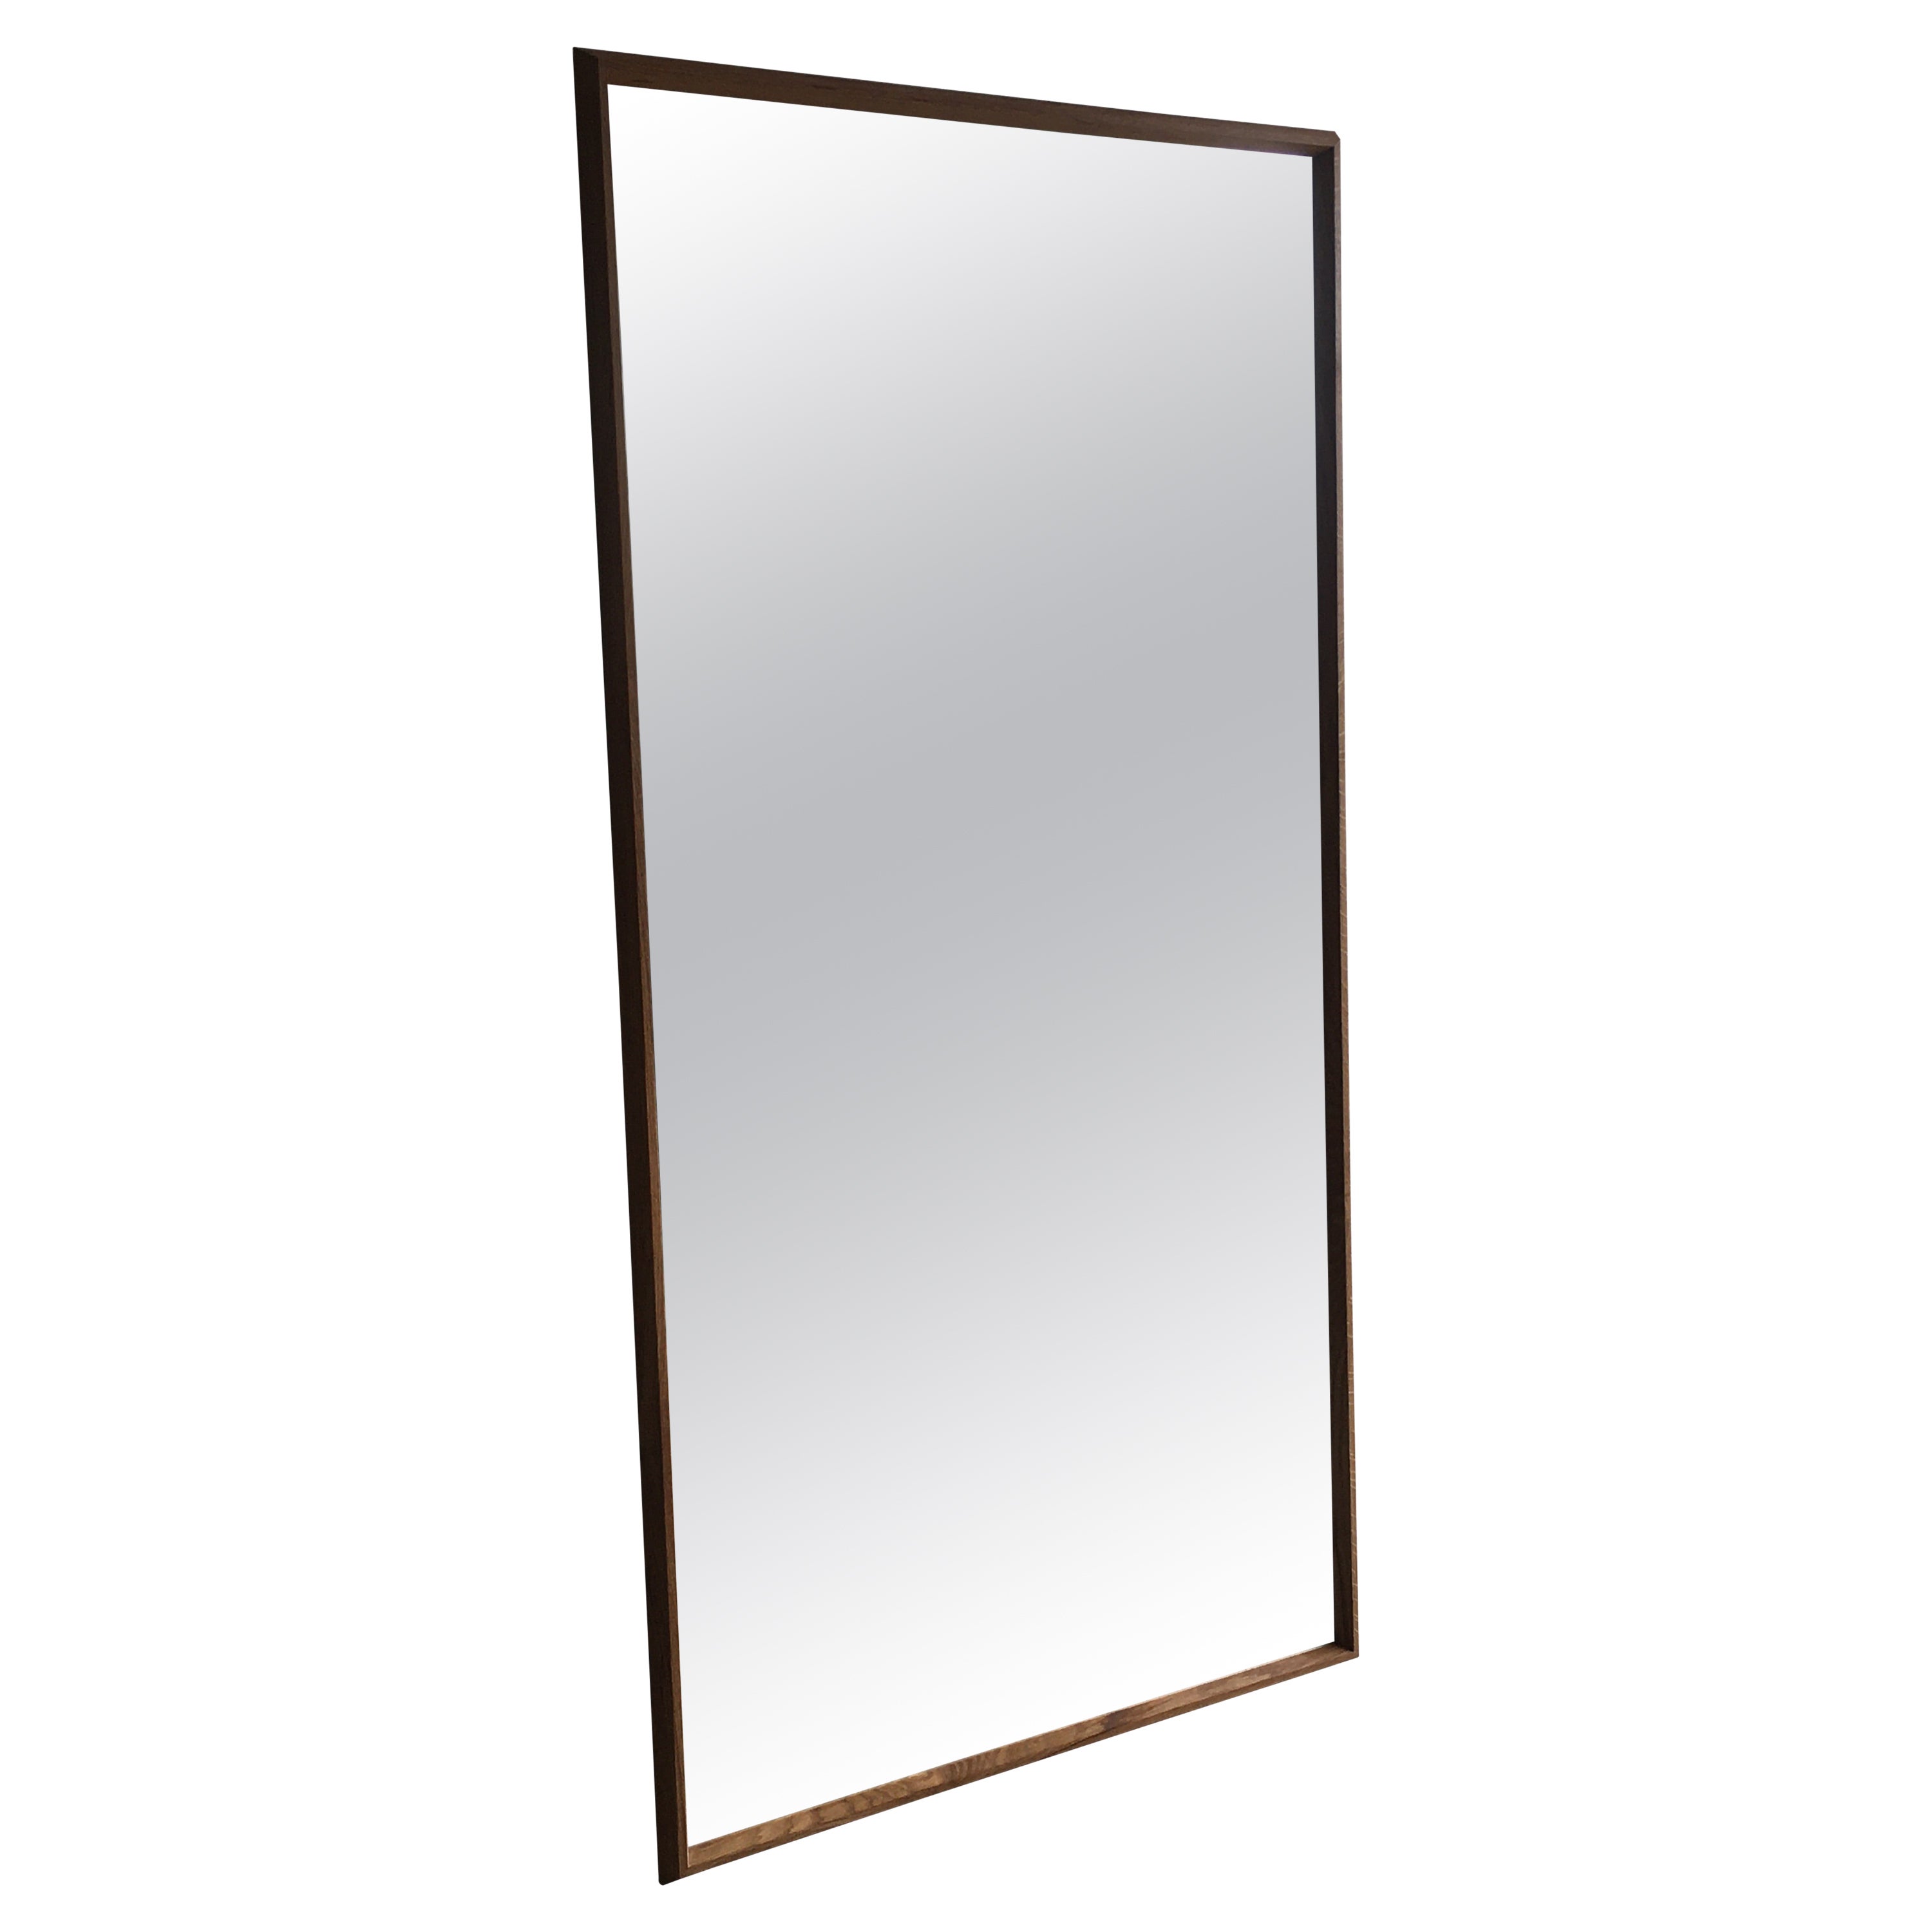 SB Mirror Frame, Finely Crafted Frame with Expressive Grained Oak by Tomaz Viana For Sale